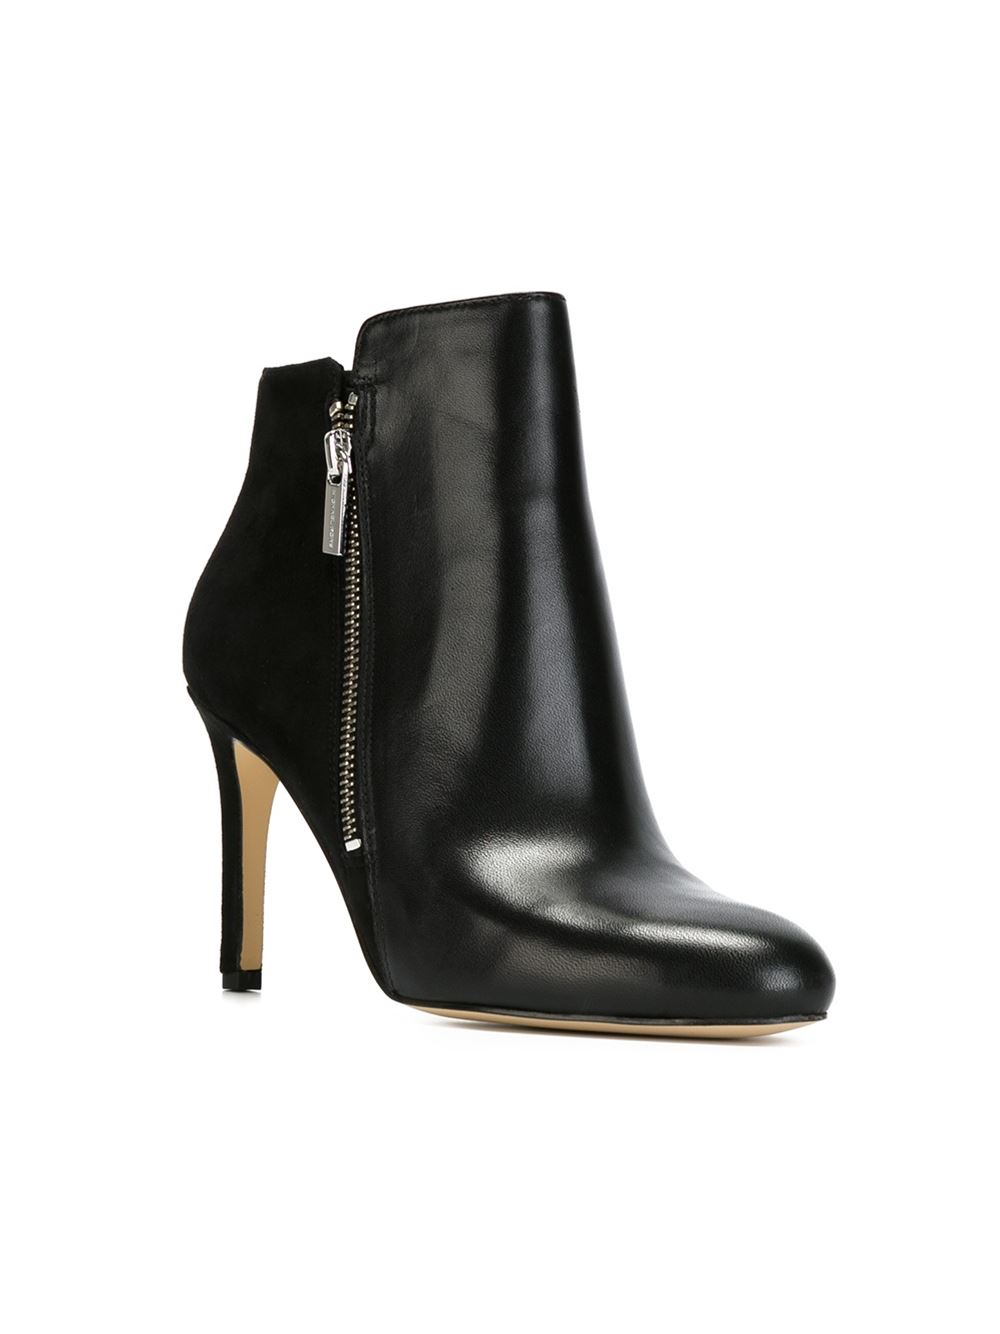 Lyst - Michael michael kors Stiletto Ankle Boots in Black